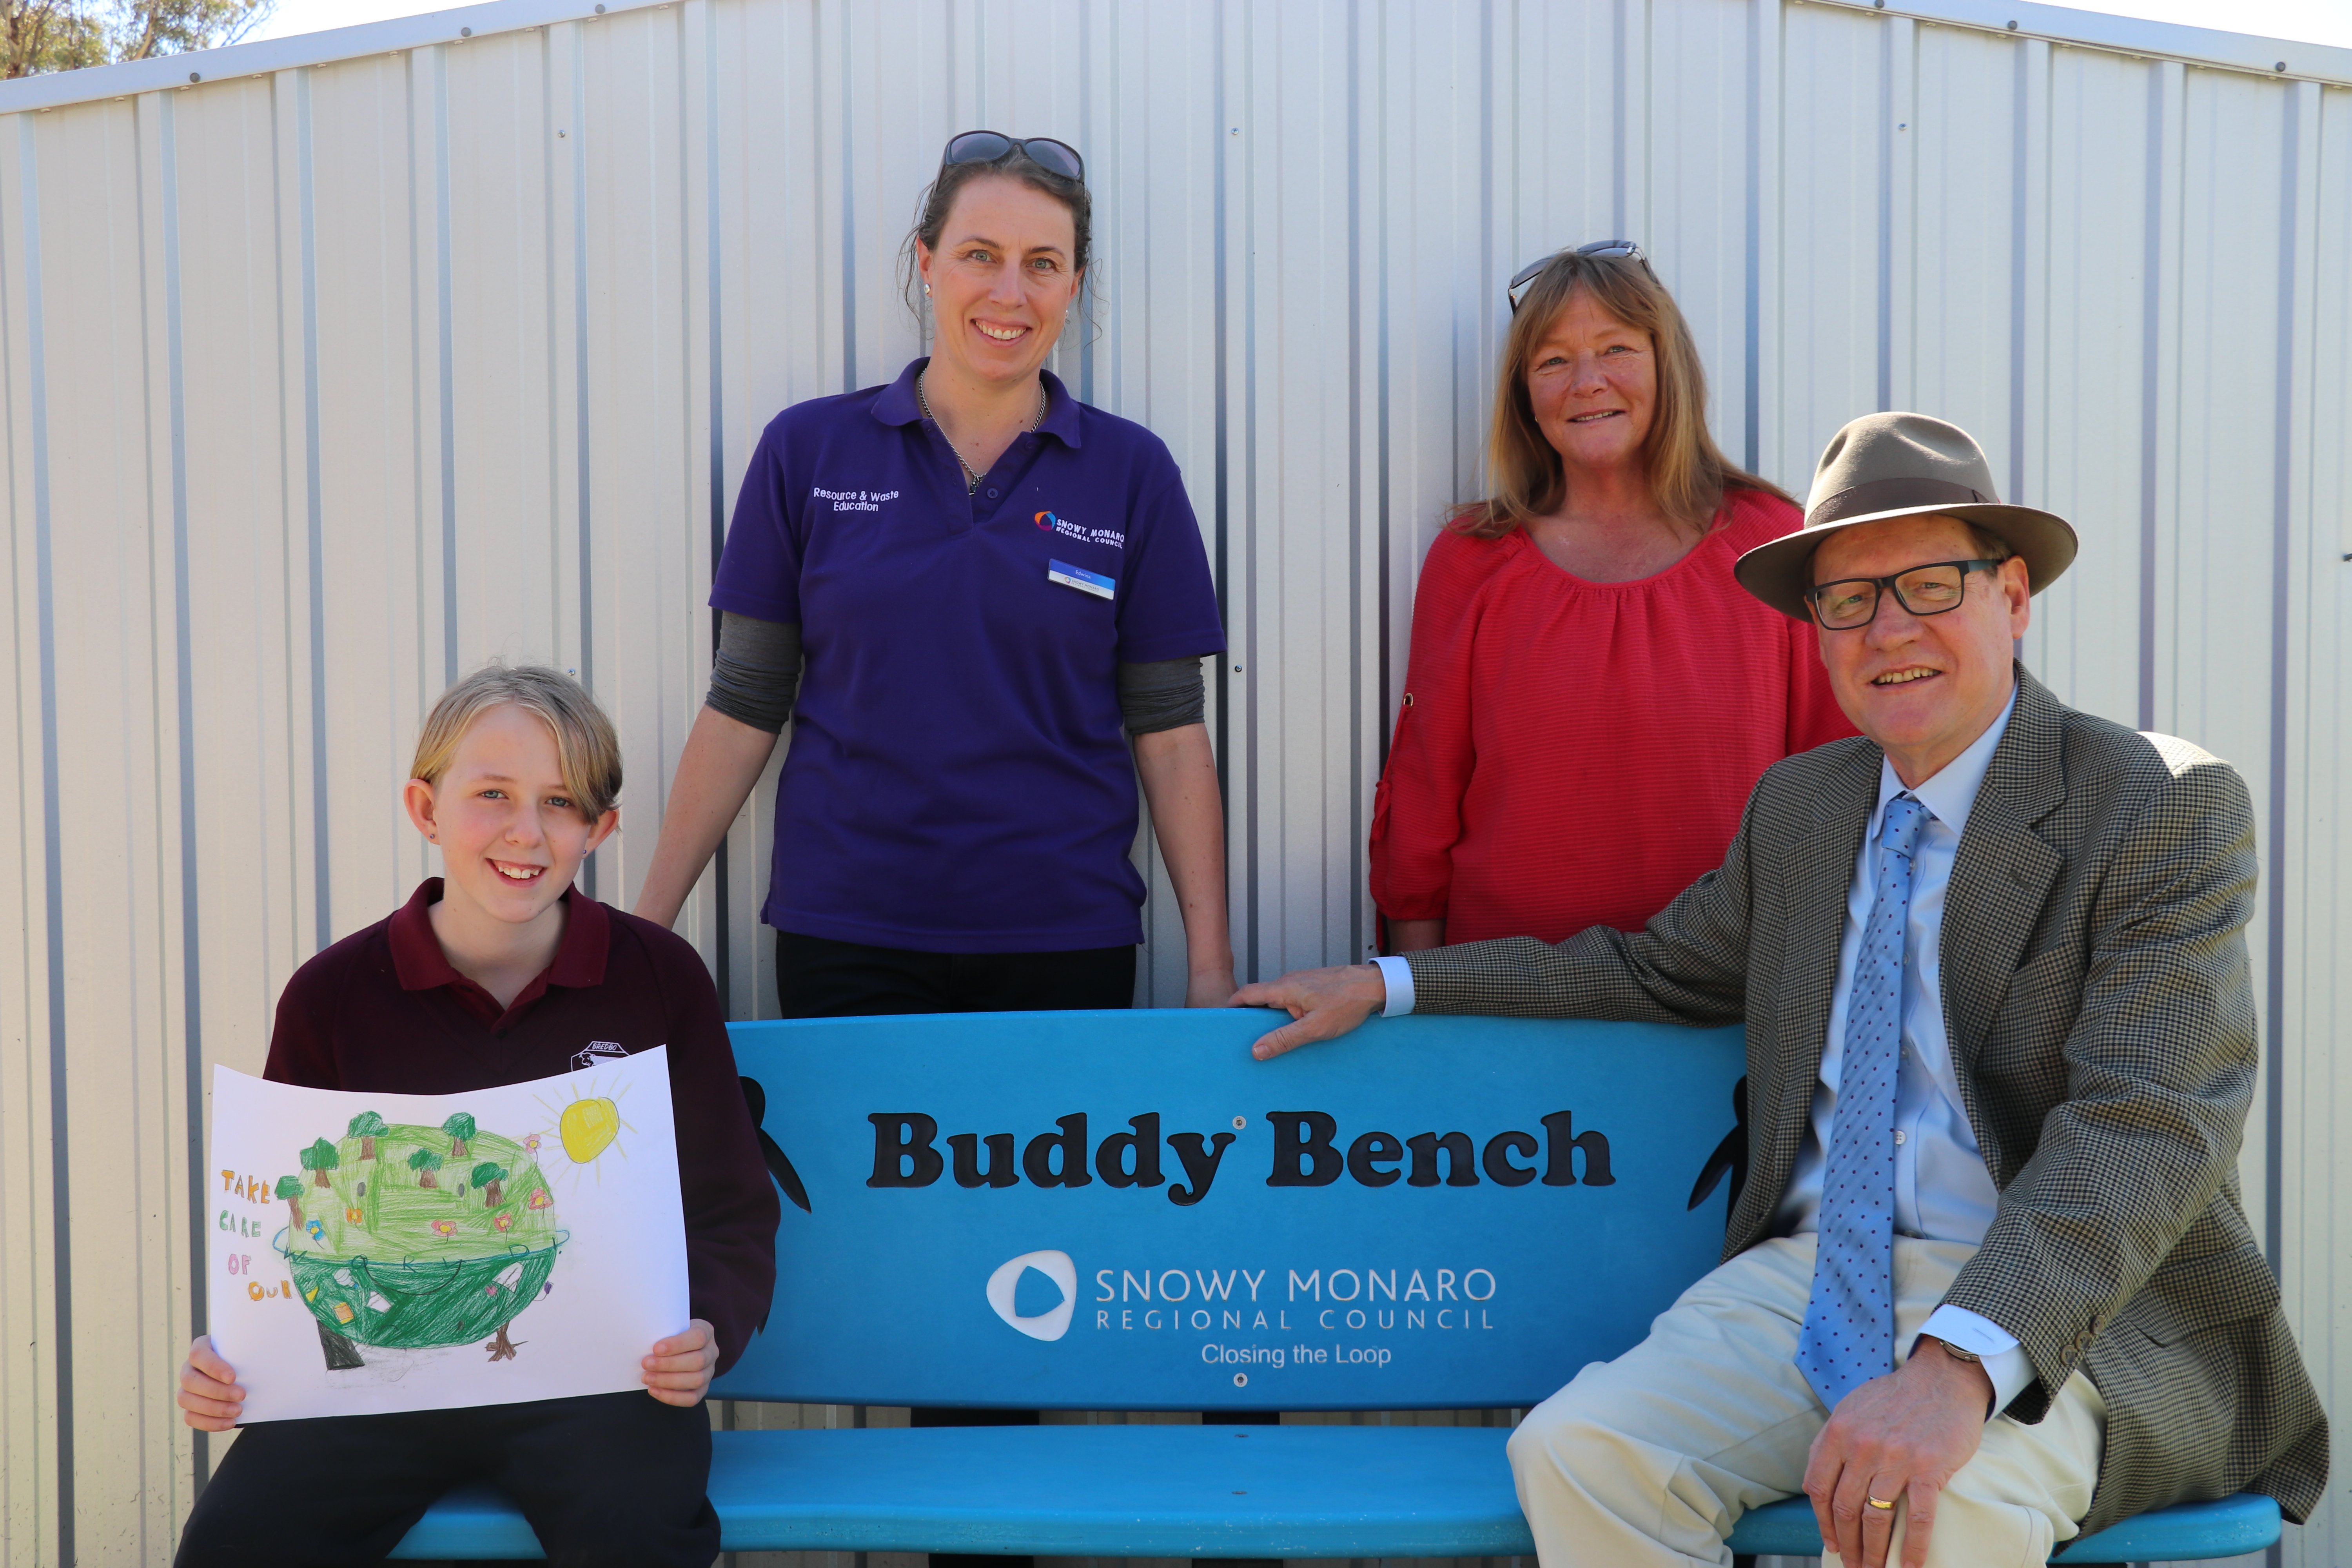 Buddy Bench creates a safe place to connect at Bredbo Public School